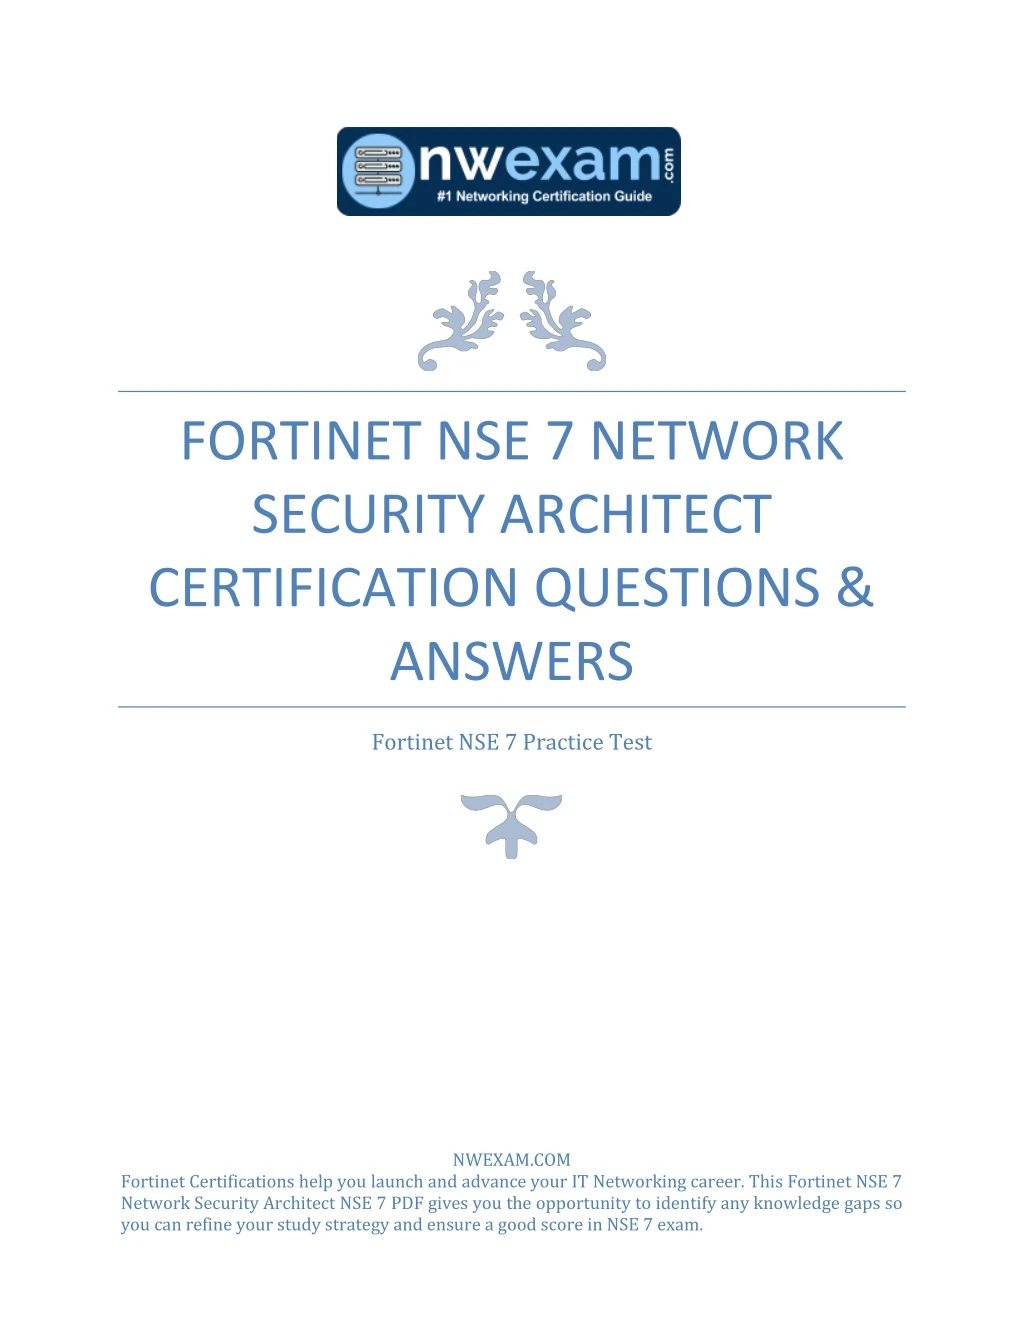 fortinet nse 7 network security architect